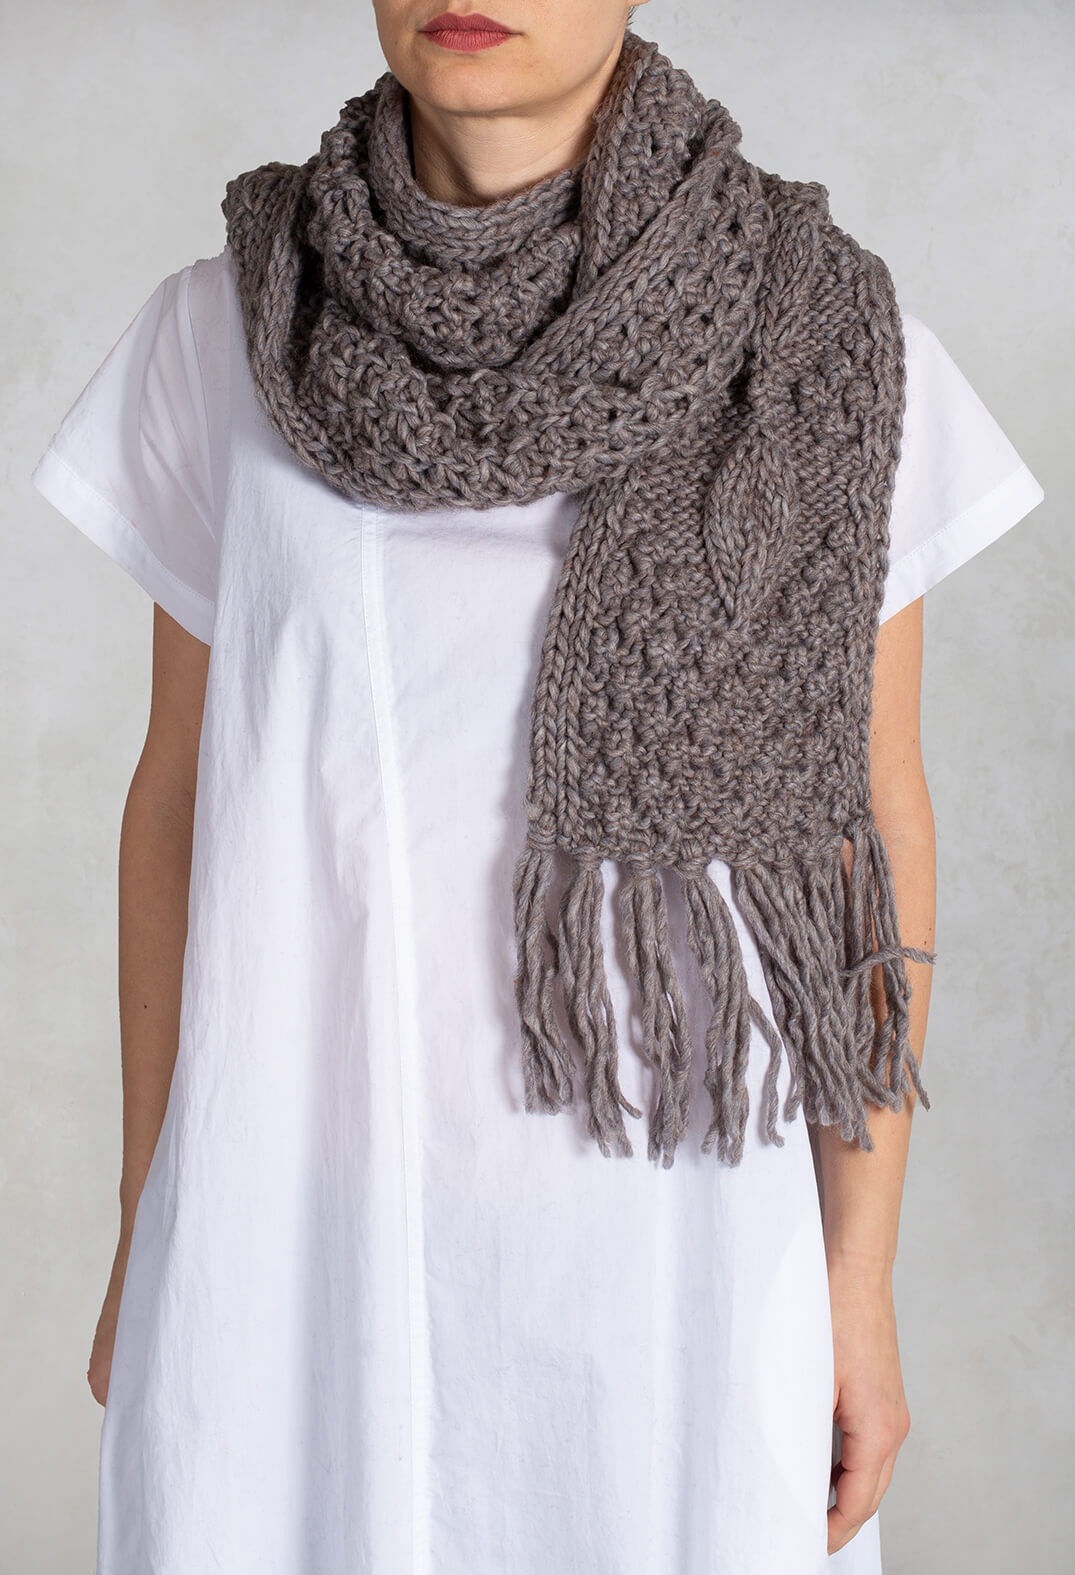 Scarf in Brown